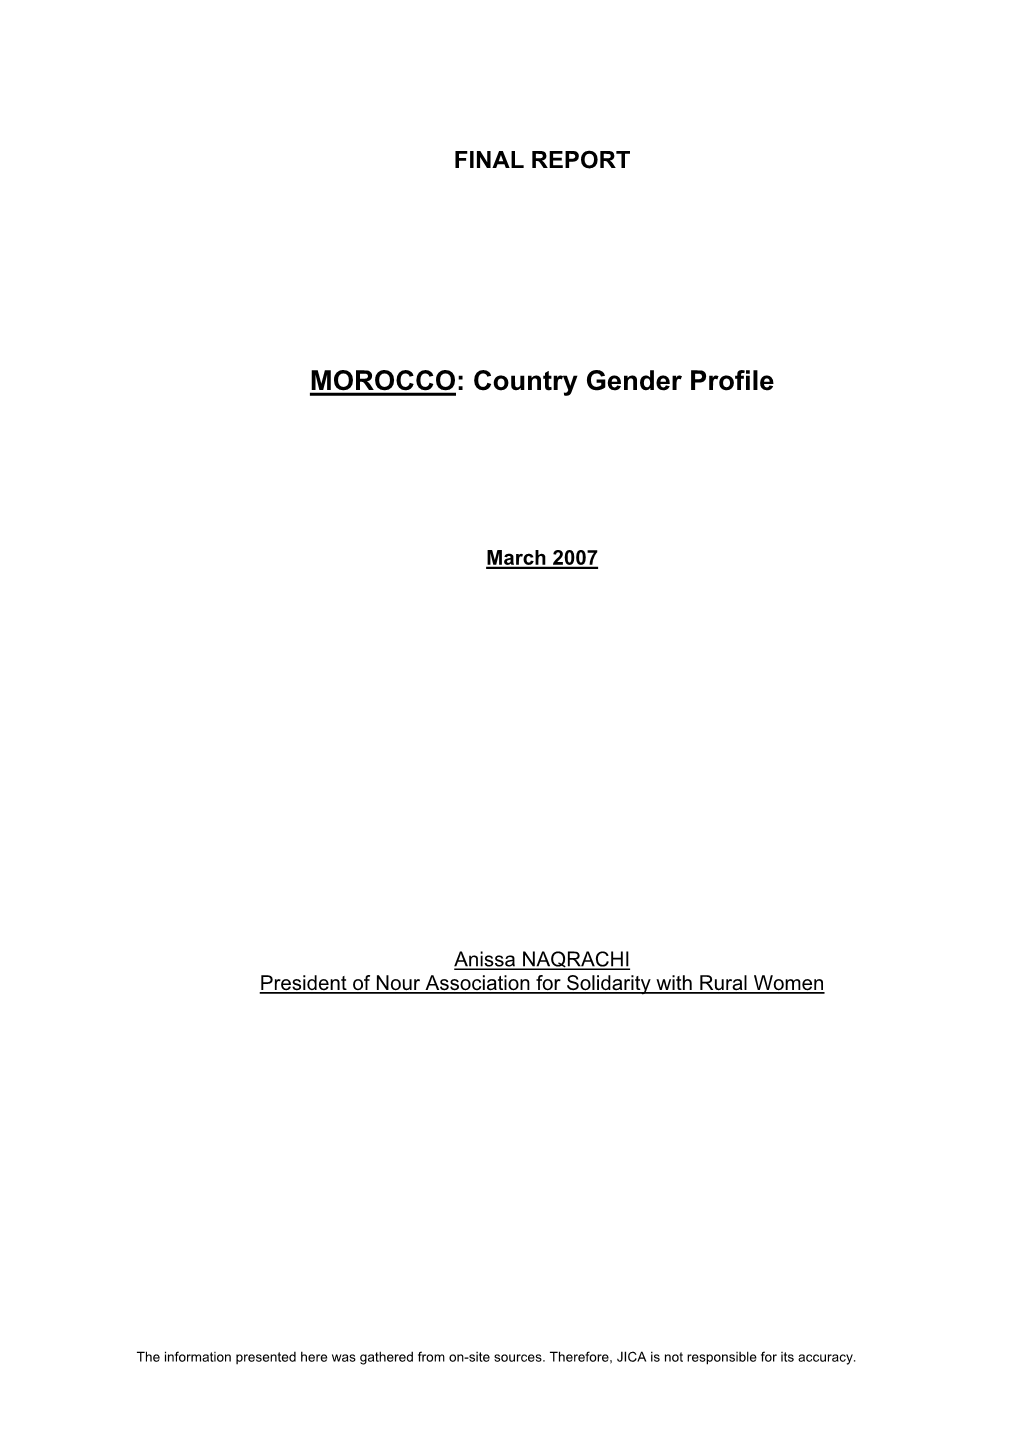 MOROCCO: Country Gender Profile